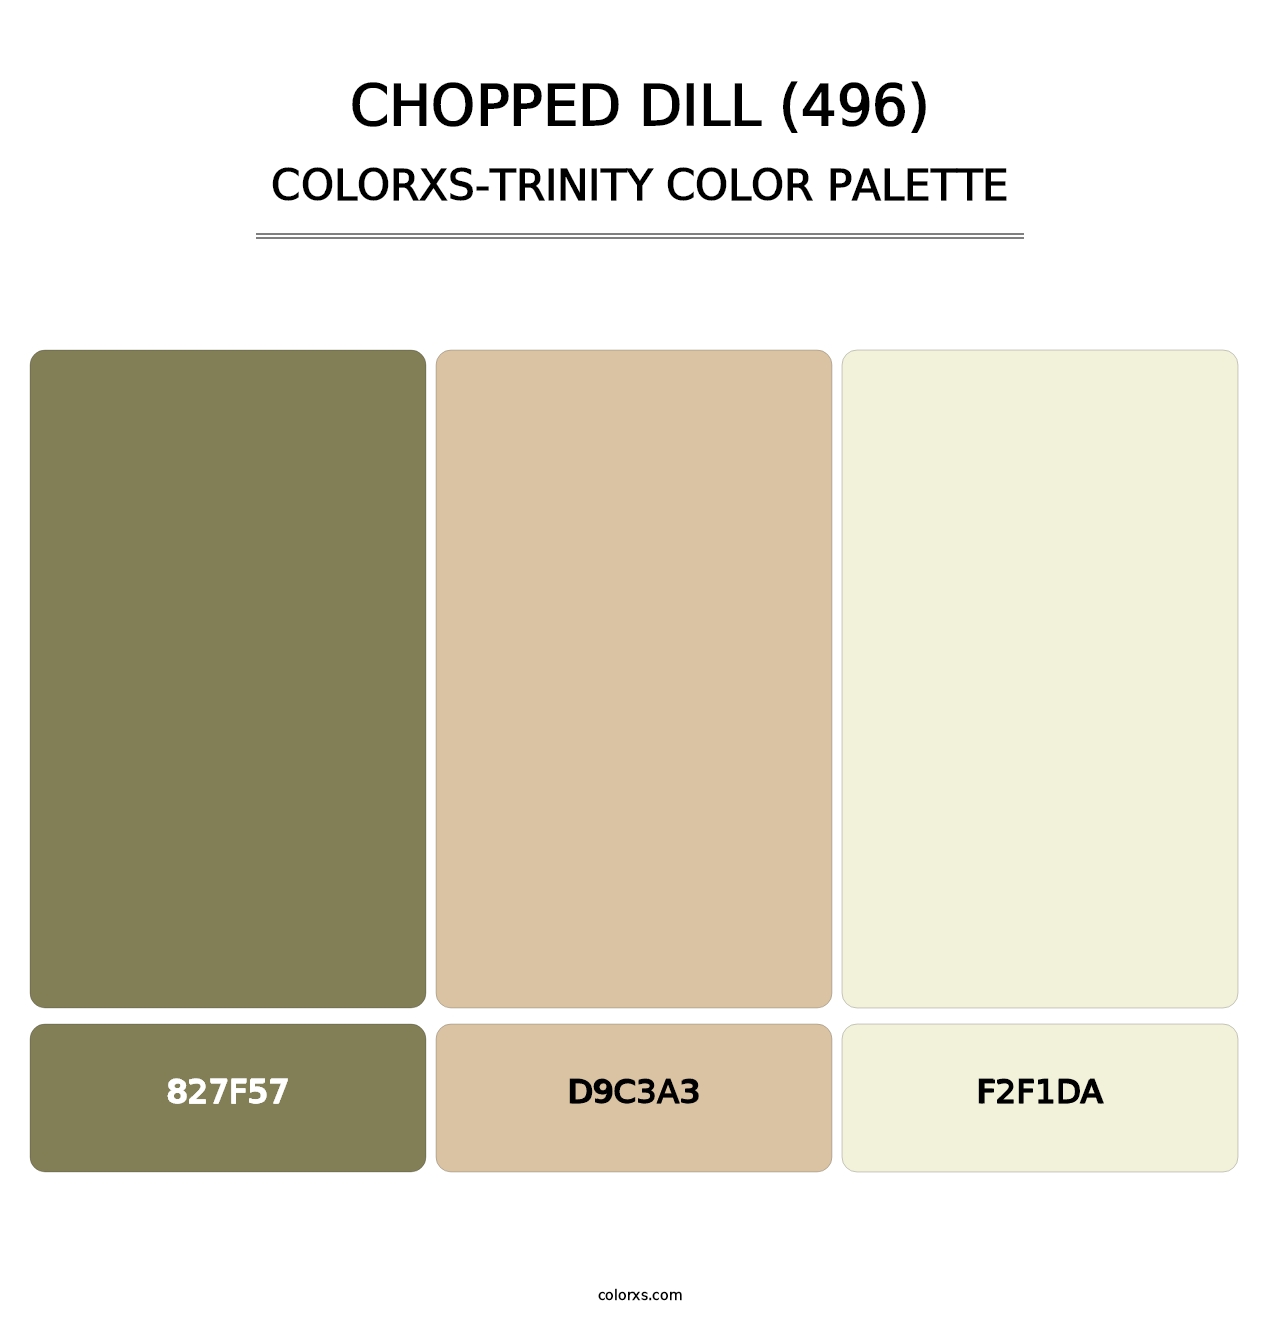 Chopped Dill (496) - Colorxs Trinity Palette